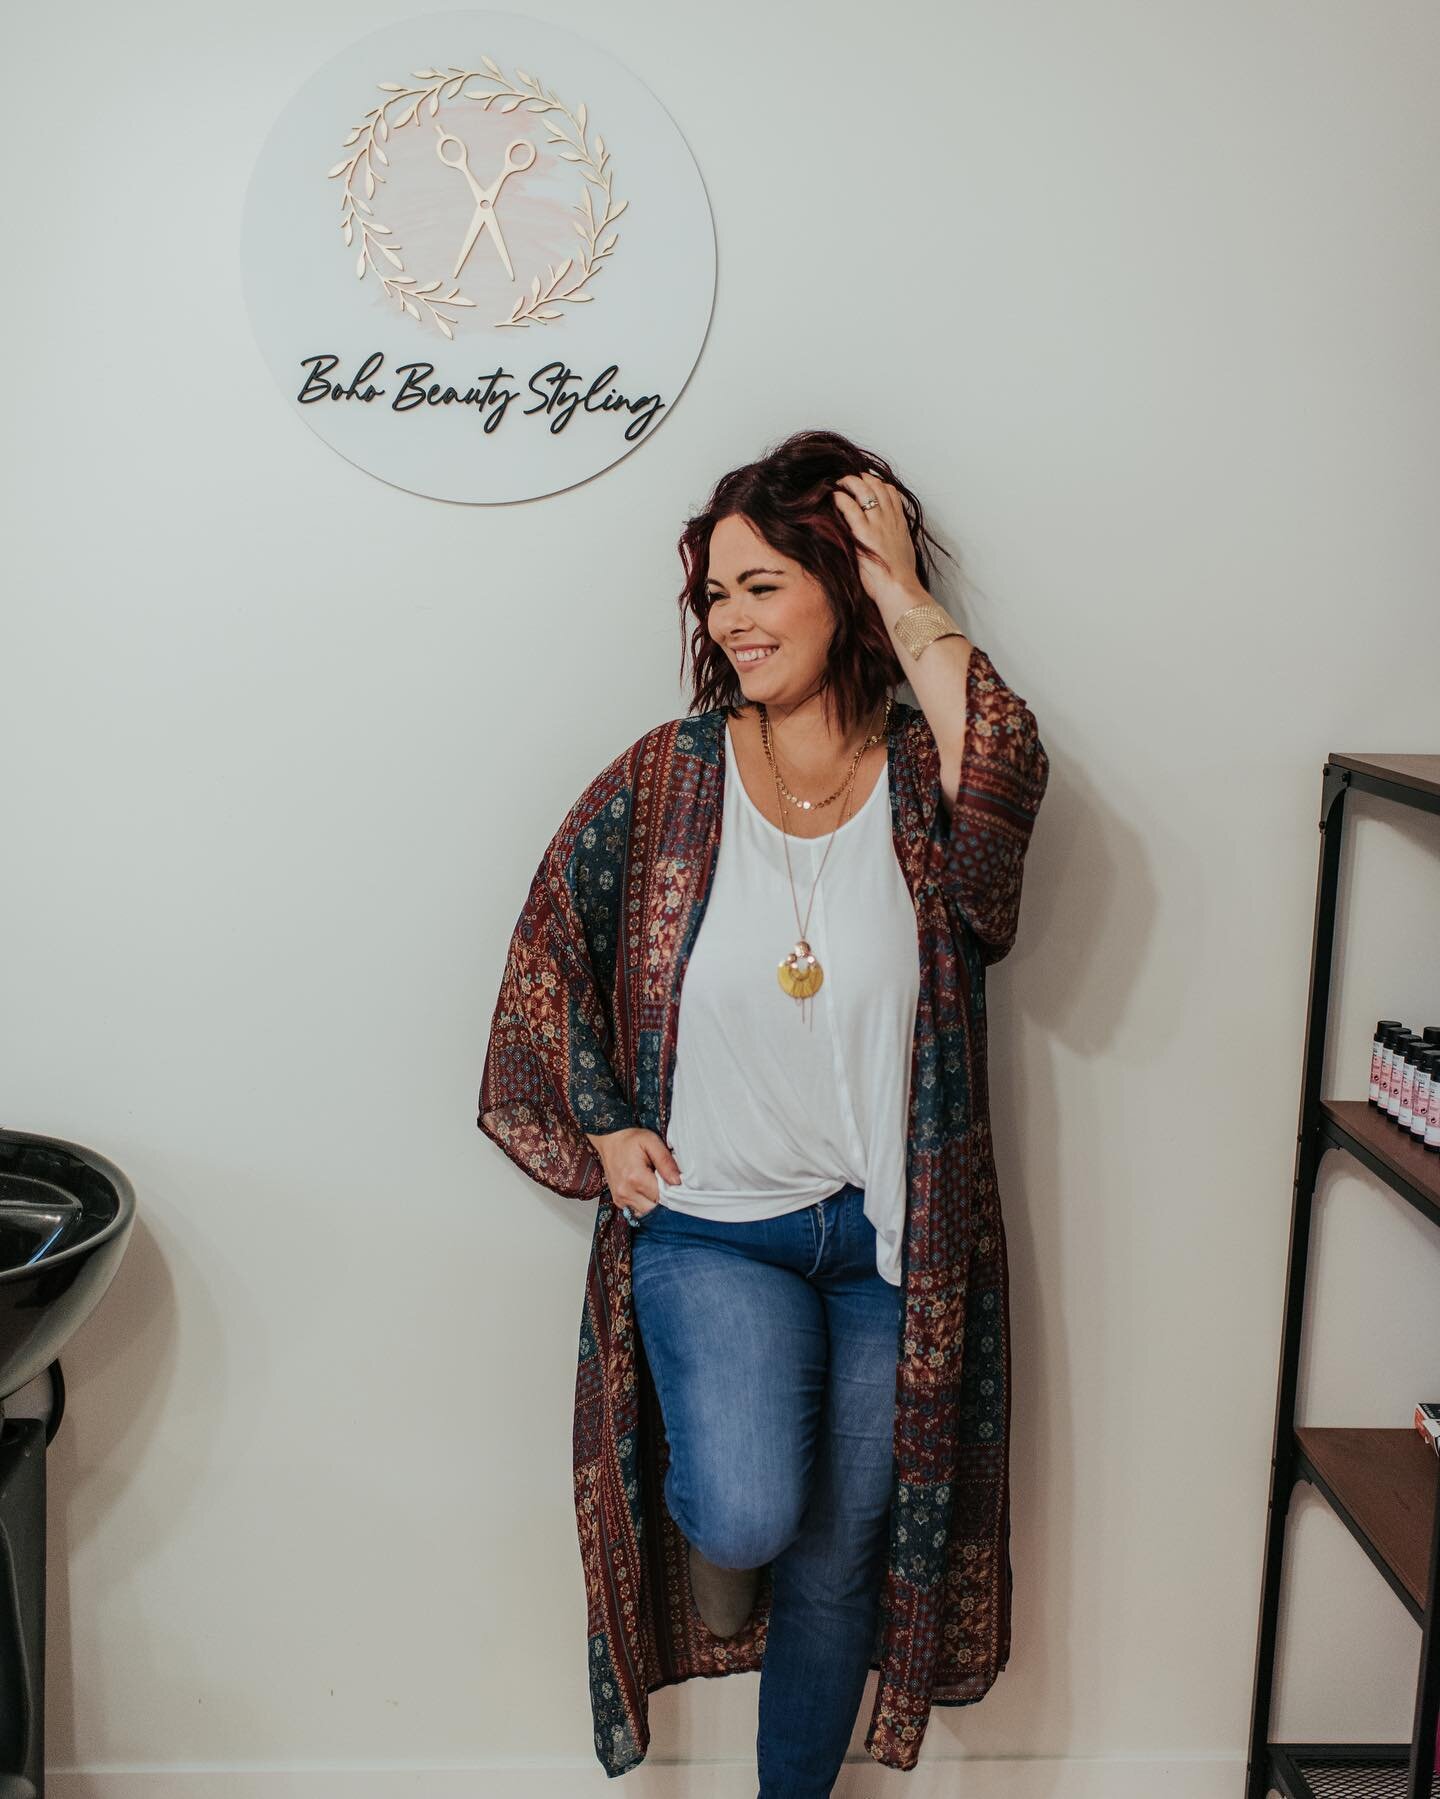 HI! 👋 
.
We have a lot more followers so I thought I should introduce myself! 
.
My name is Amy and I am the stylist behind Boho Beauty Styling! 🤍 Ever since I was a wee one, I&rsquo;ve been in love with hair styling. My poor cousins would be my gu